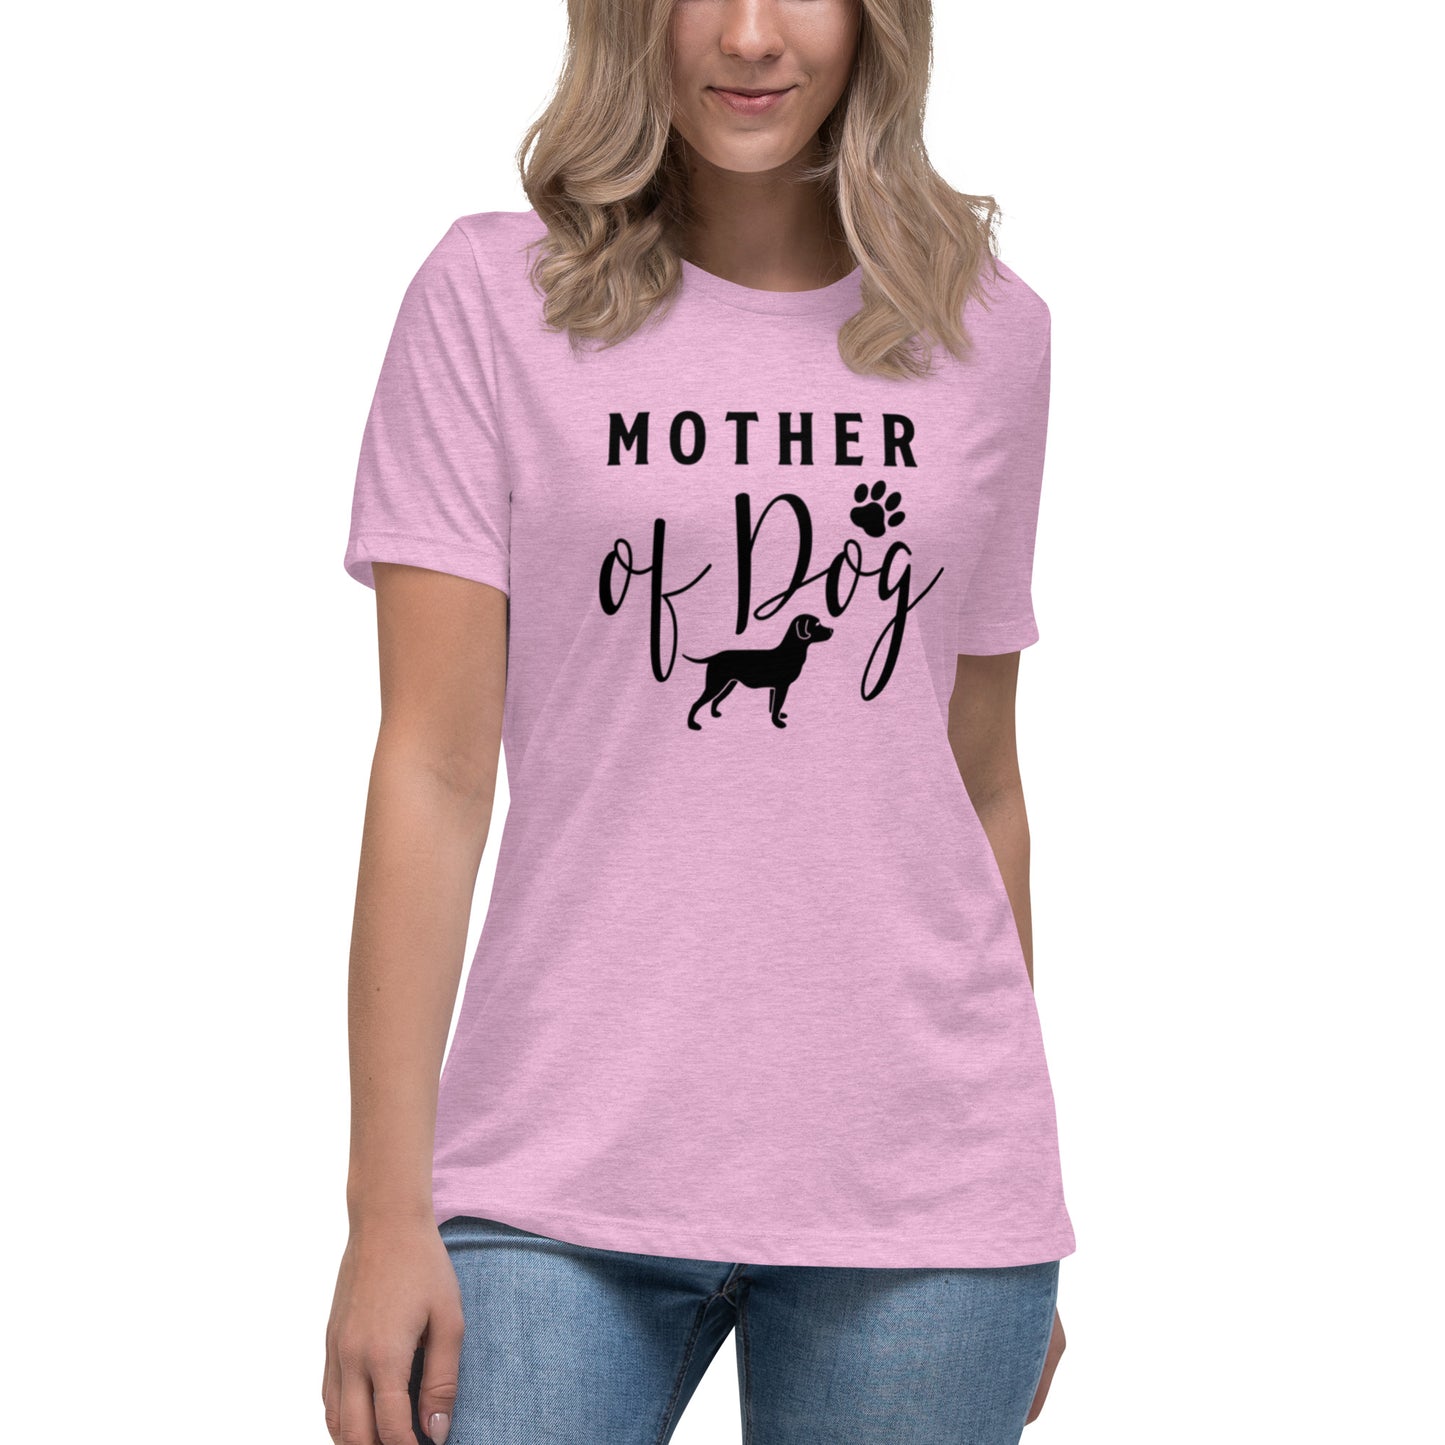 Discover Stylish Mother of Dog T-Shirts – Perfect Apparel for Dog Moms!